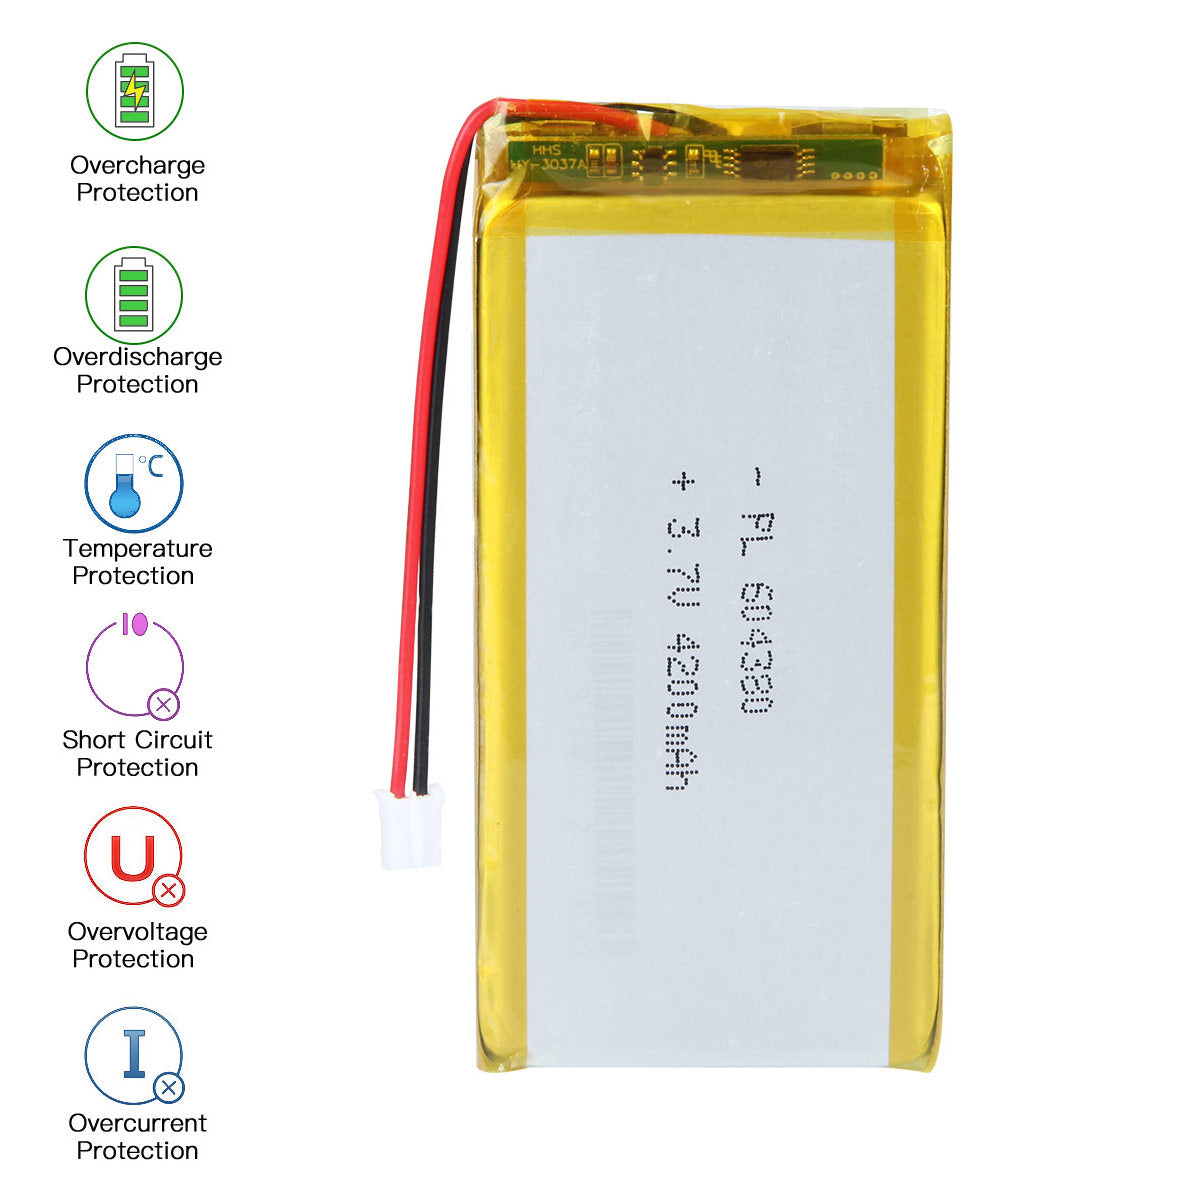 YDL 3.7V 4200mAh 604380 Rechargeable Lithium Polymer Battery